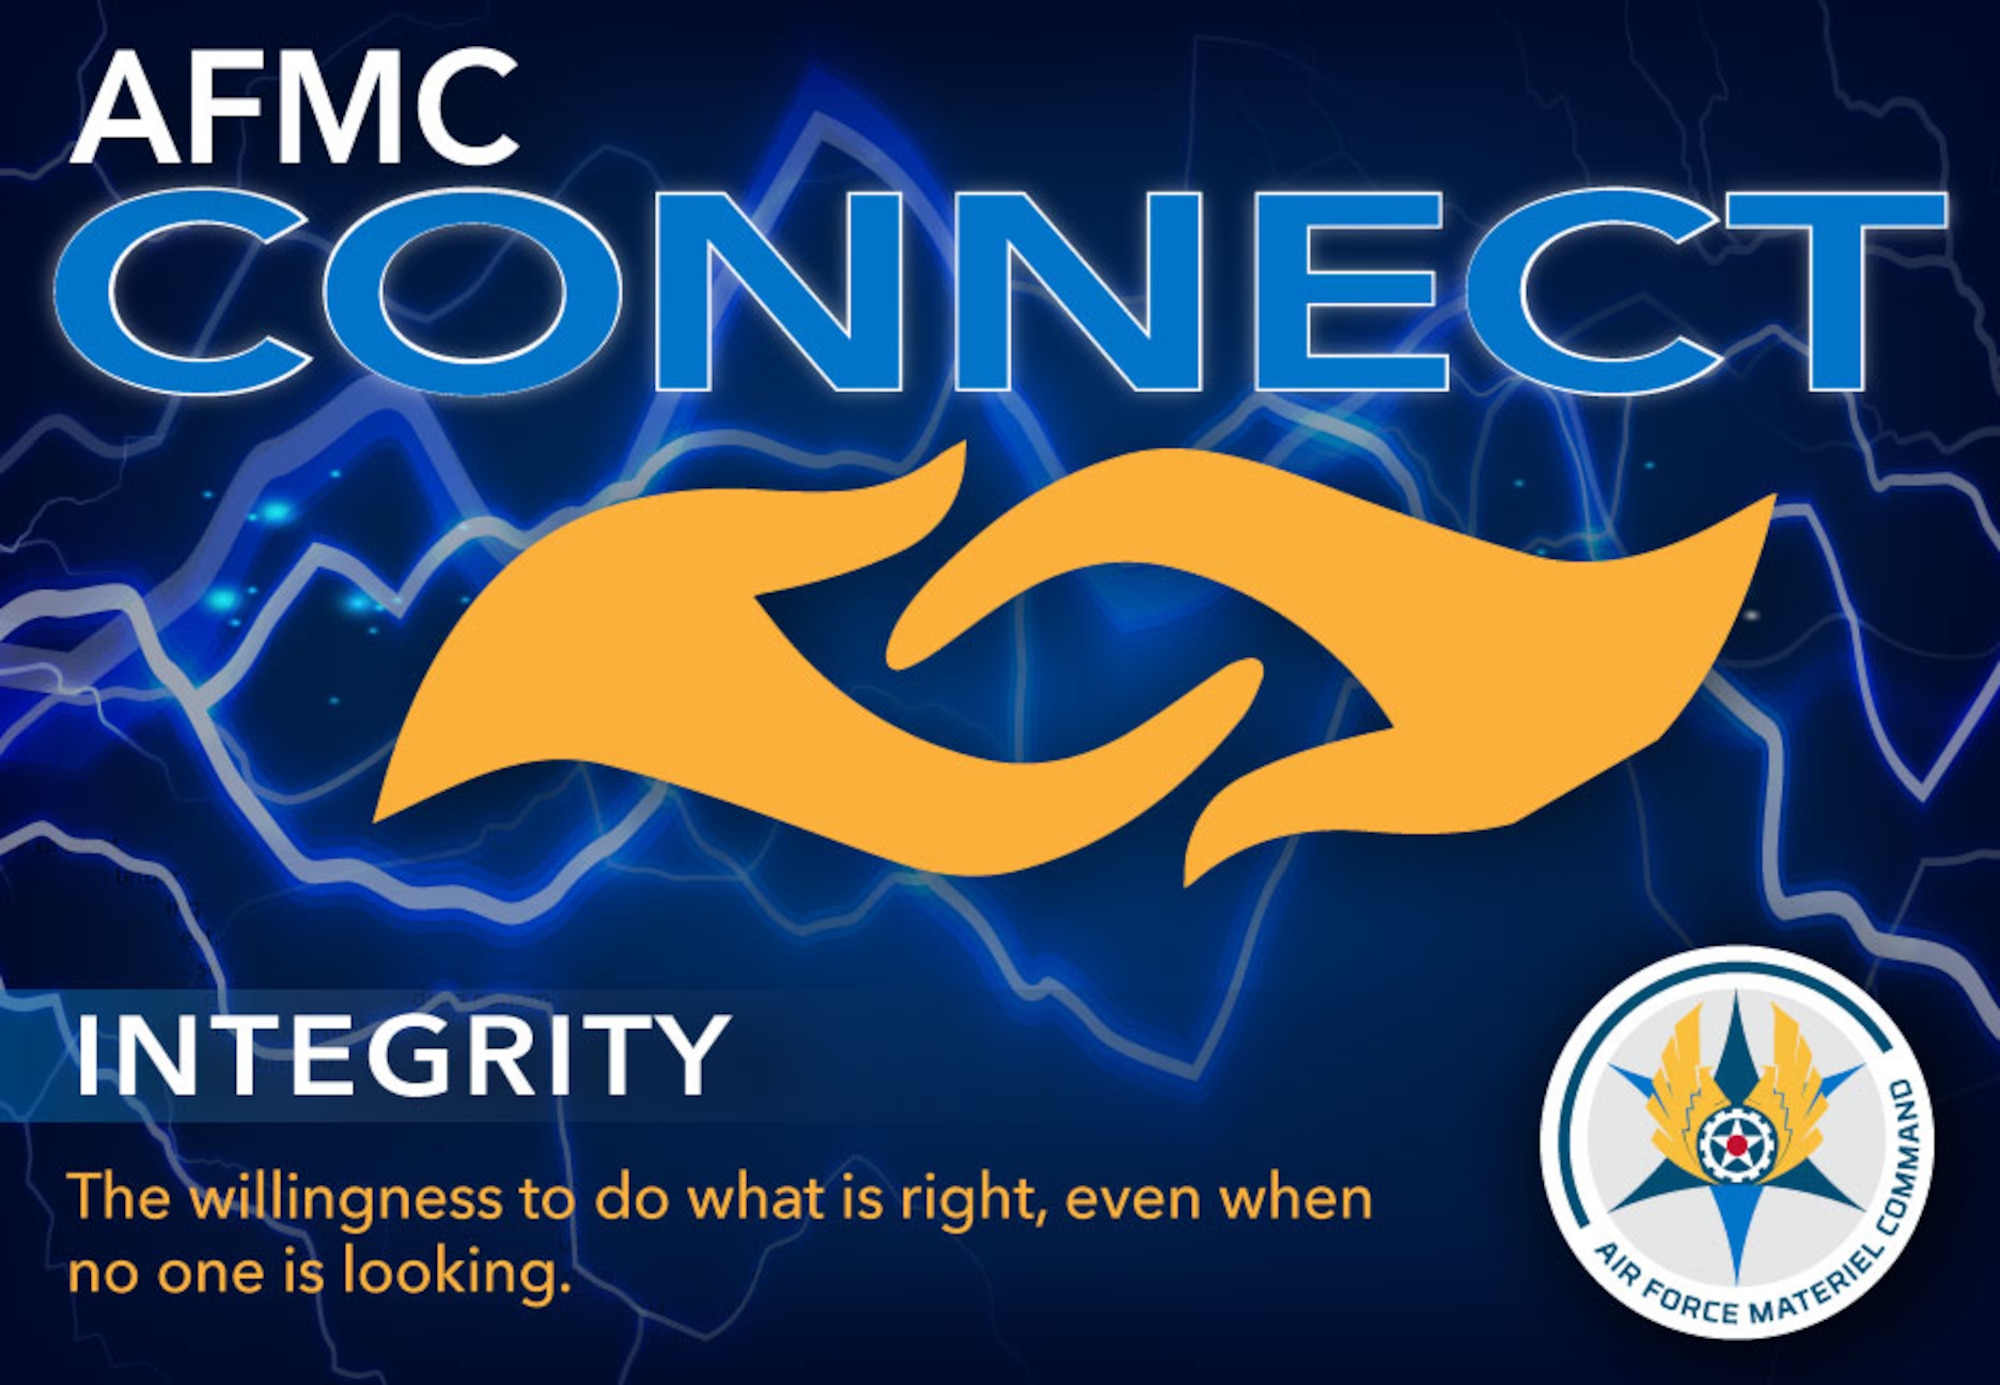 The AFMC Connect focus for October is integrity.